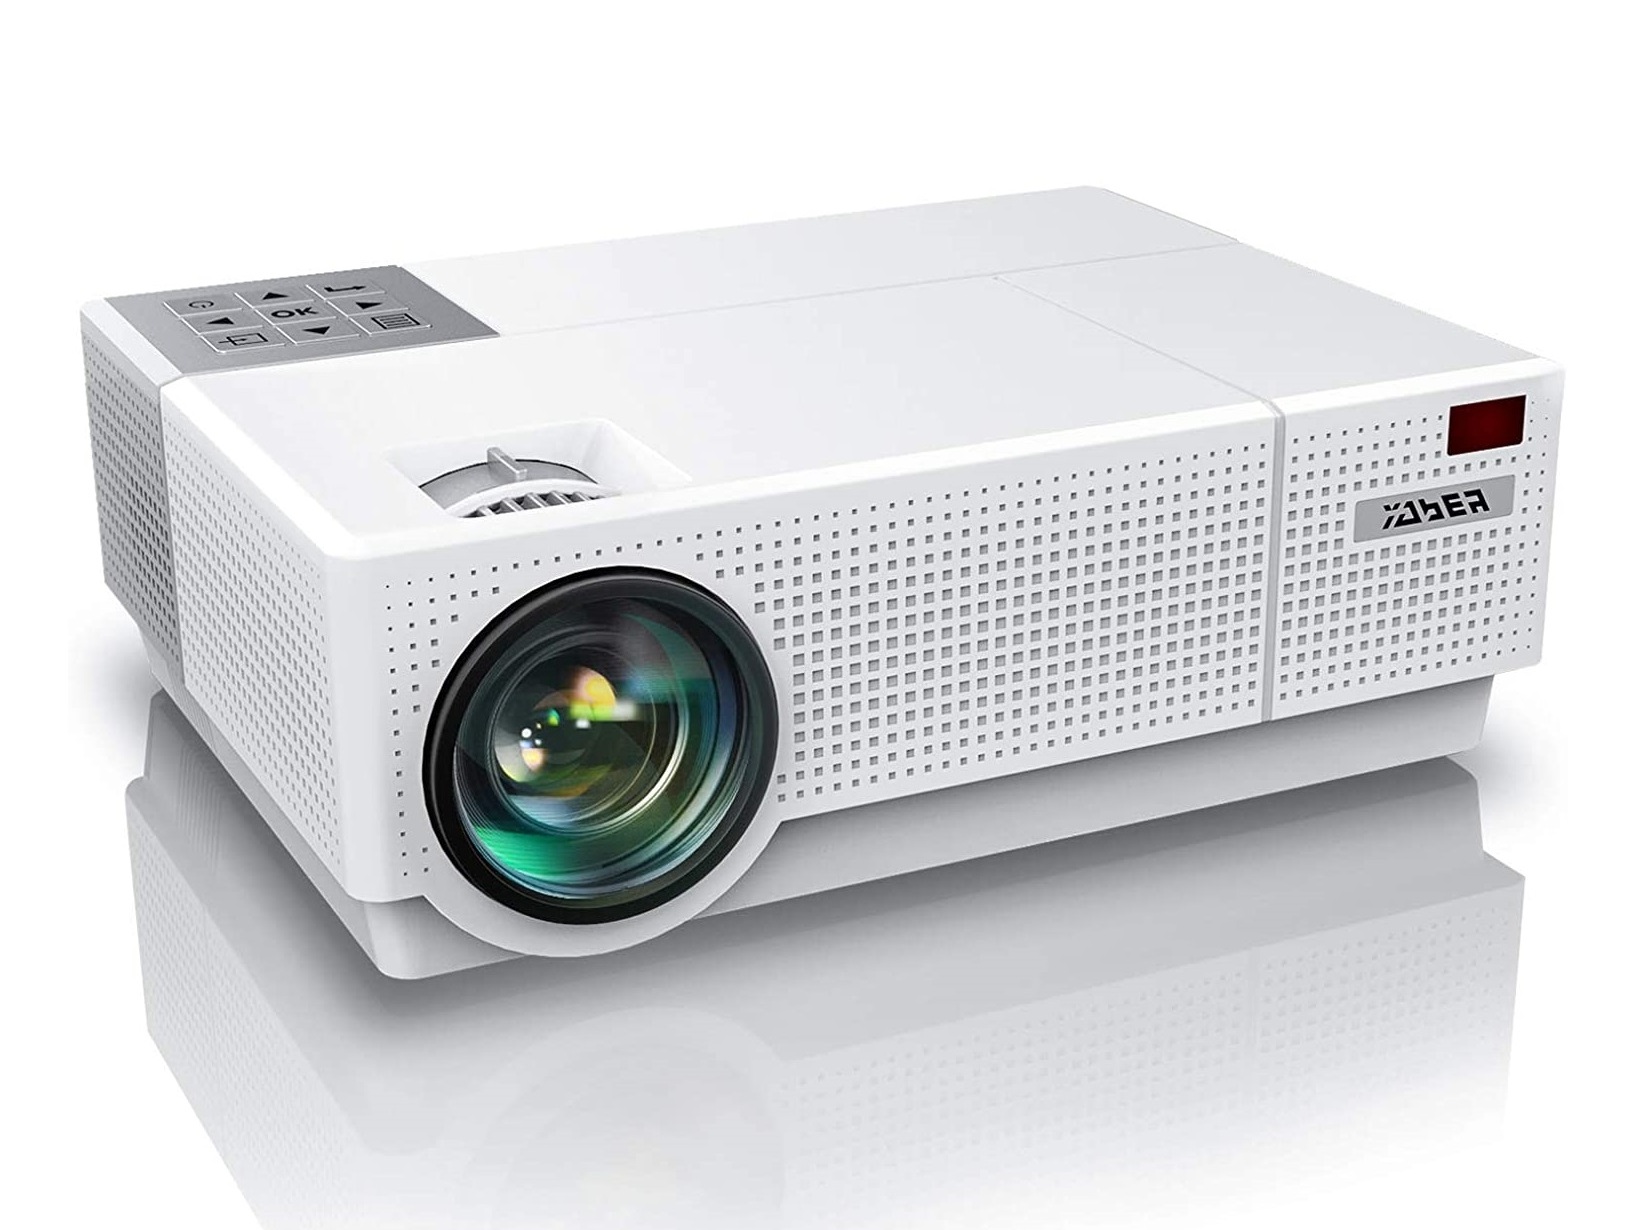 Popular Yaber Y31 1080p mini LED projector on sale for just $205 USD right  now -  News